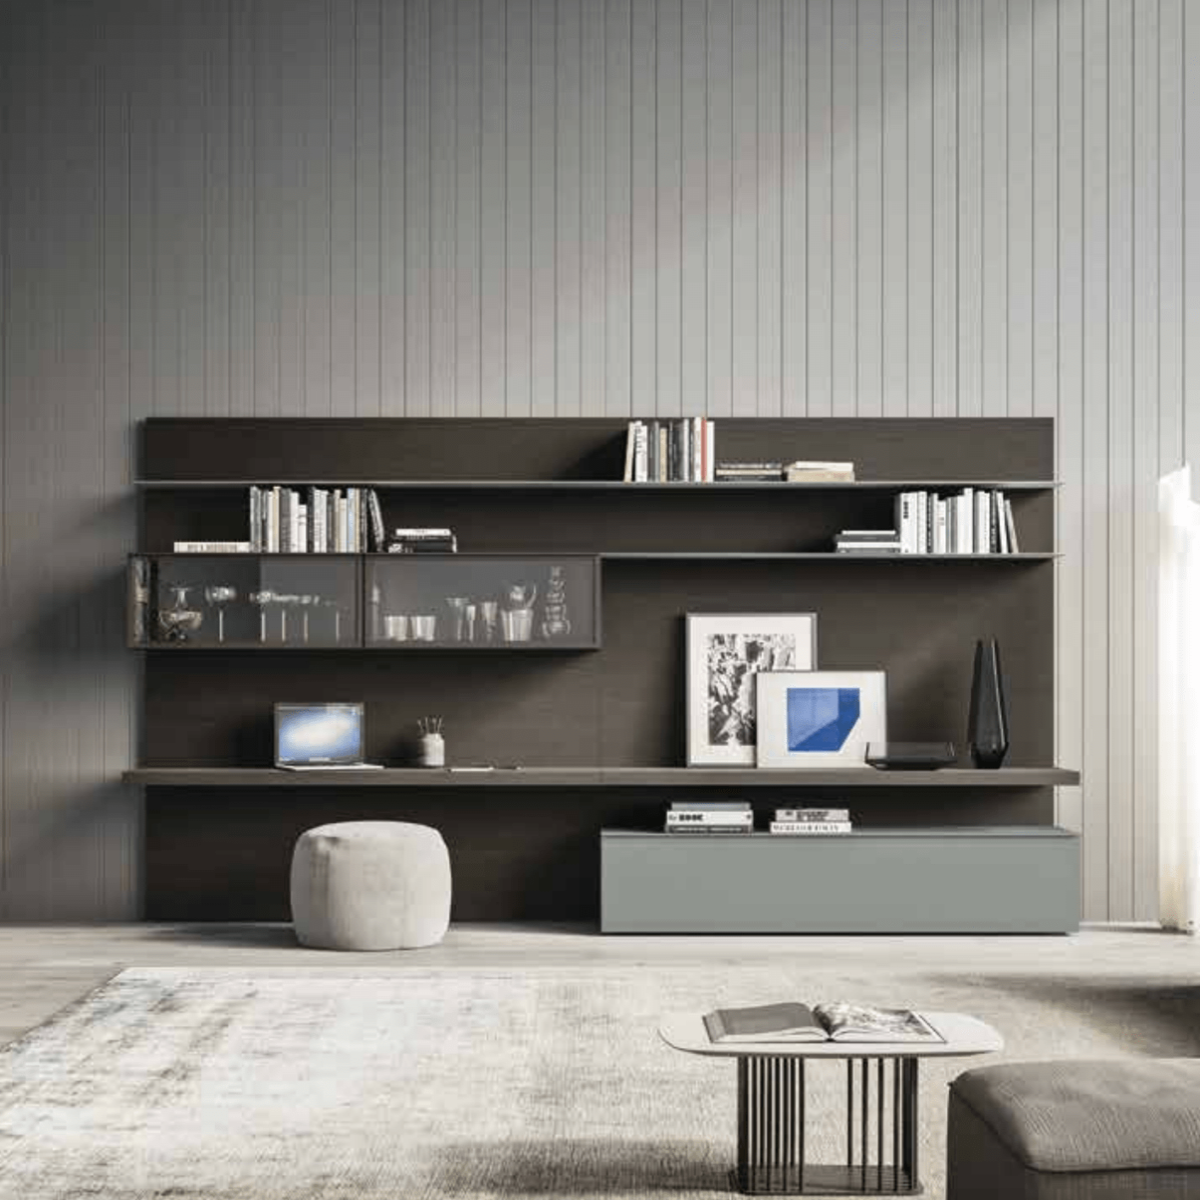 Day-17 back-panelled TV media unit by Orme - myitalianliving